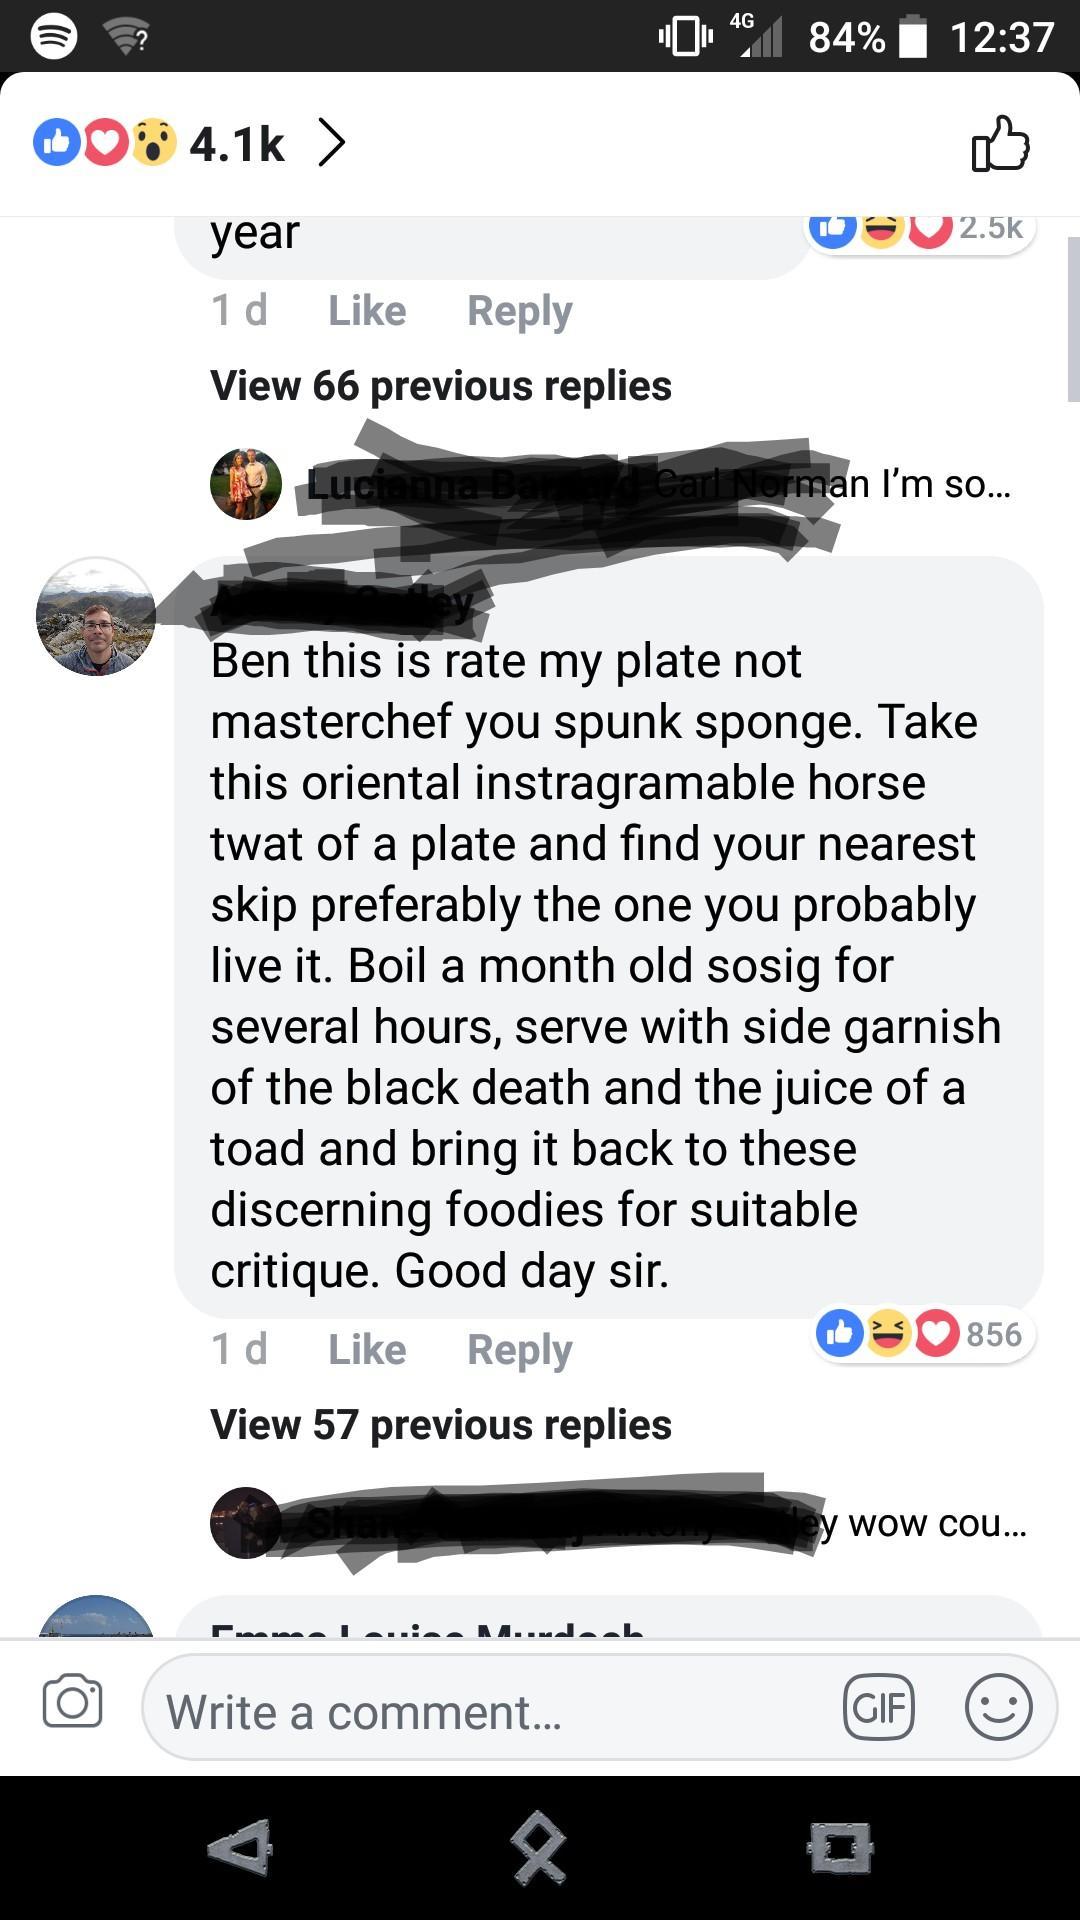 savage insults - screenshot - Do > year 1 d View 66 previous replies Lucianna Puma Louise Muudab 4G 04 84% Write a comment... Ben this is rate my plate not masterchef you spunk sponge. Take this oriental instragramable horse twat of a plate and find your 